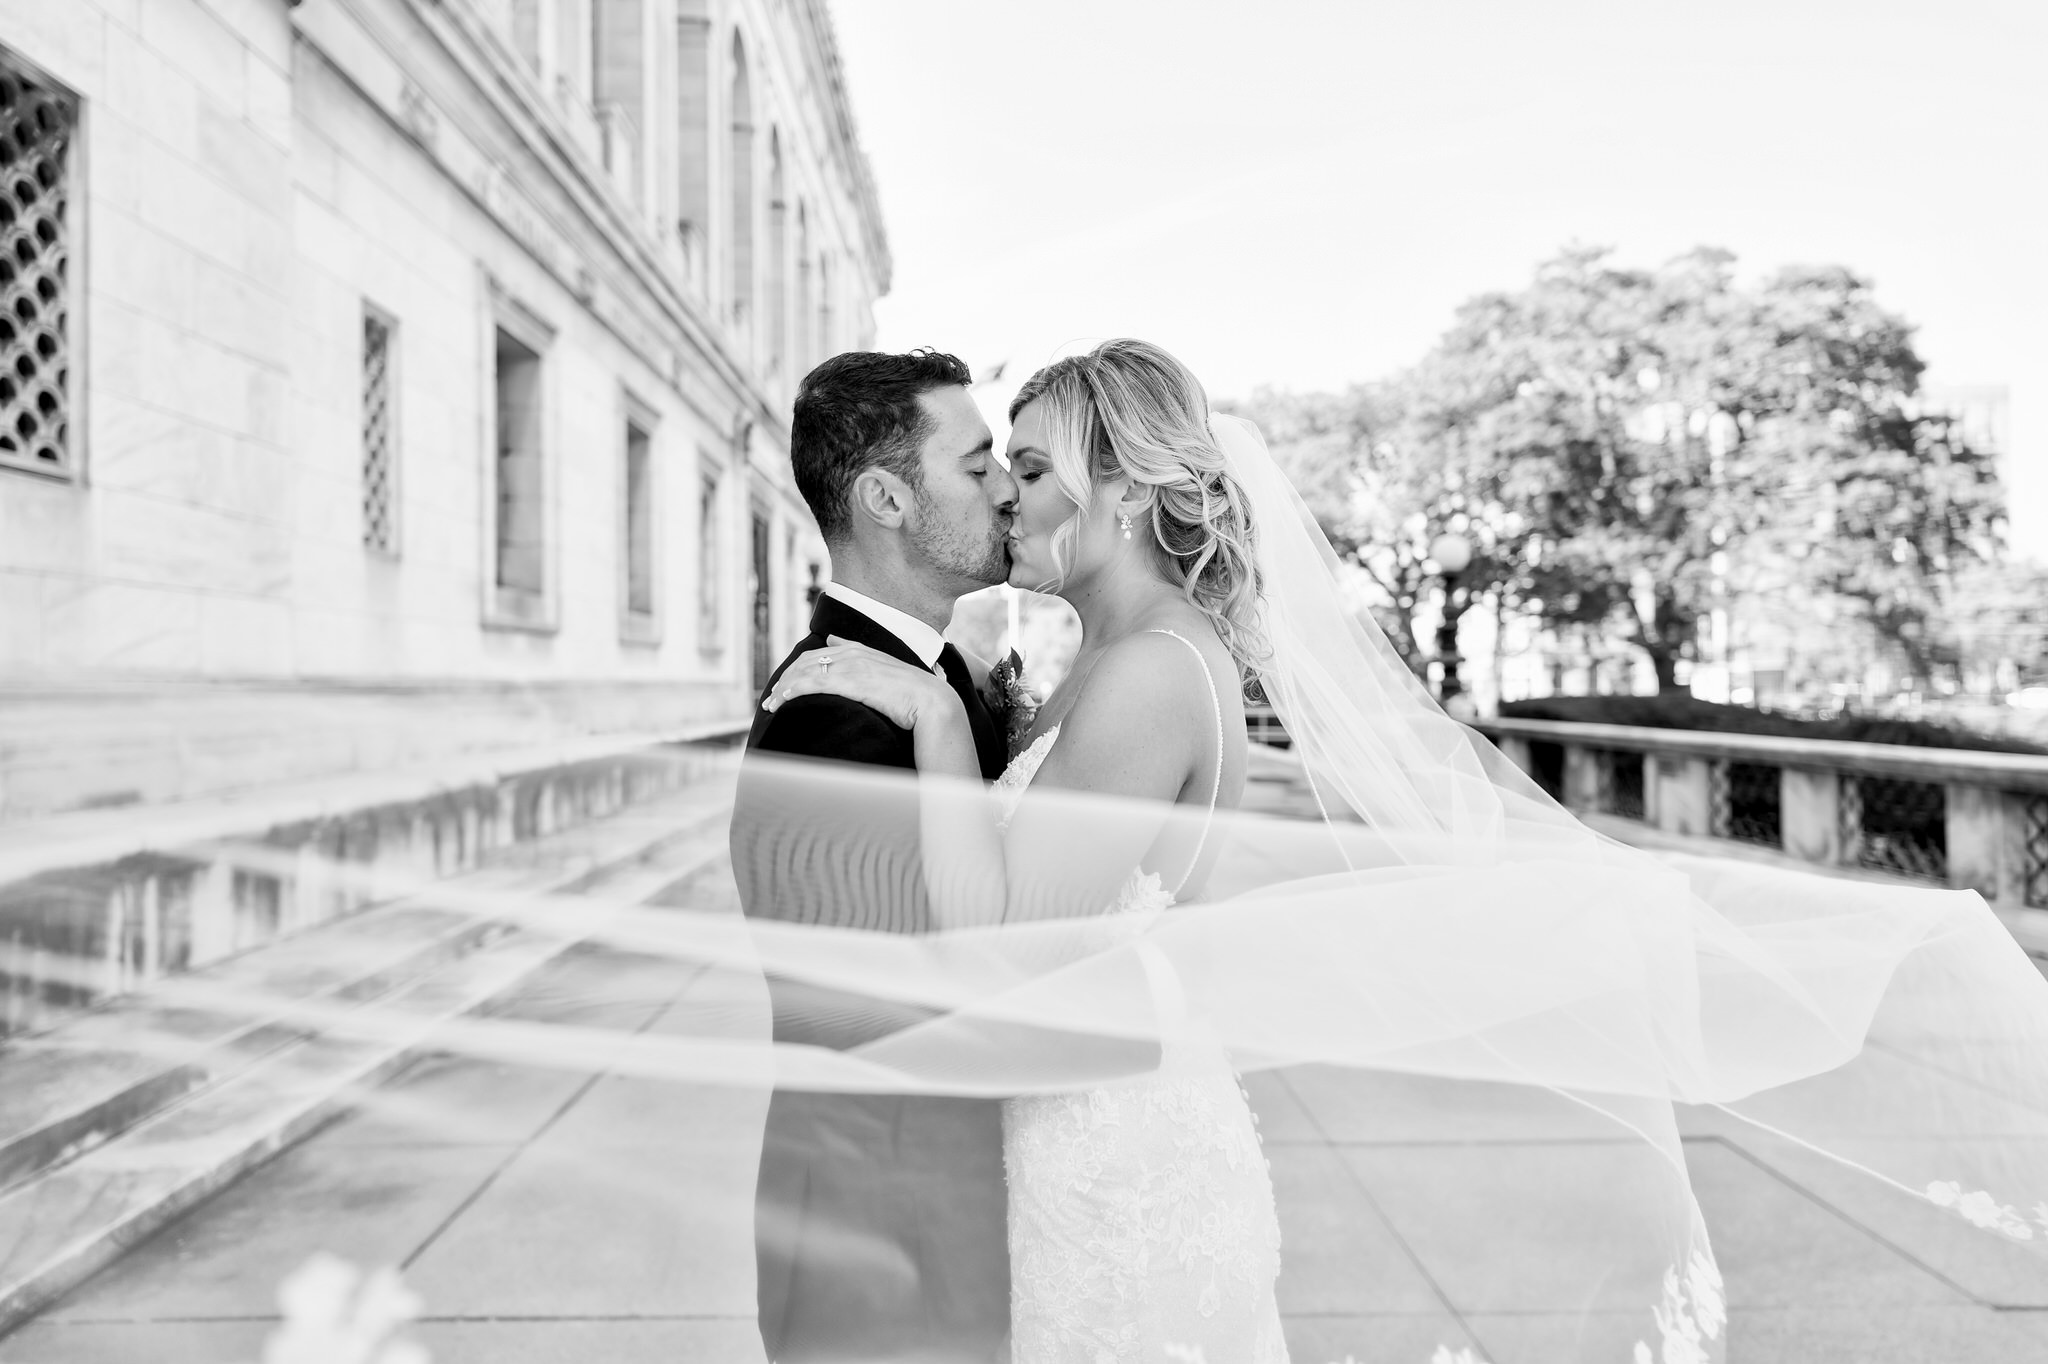 A bride and groom embrace and kiss on the front porch of the Detroit Public Library on their wedding day.  